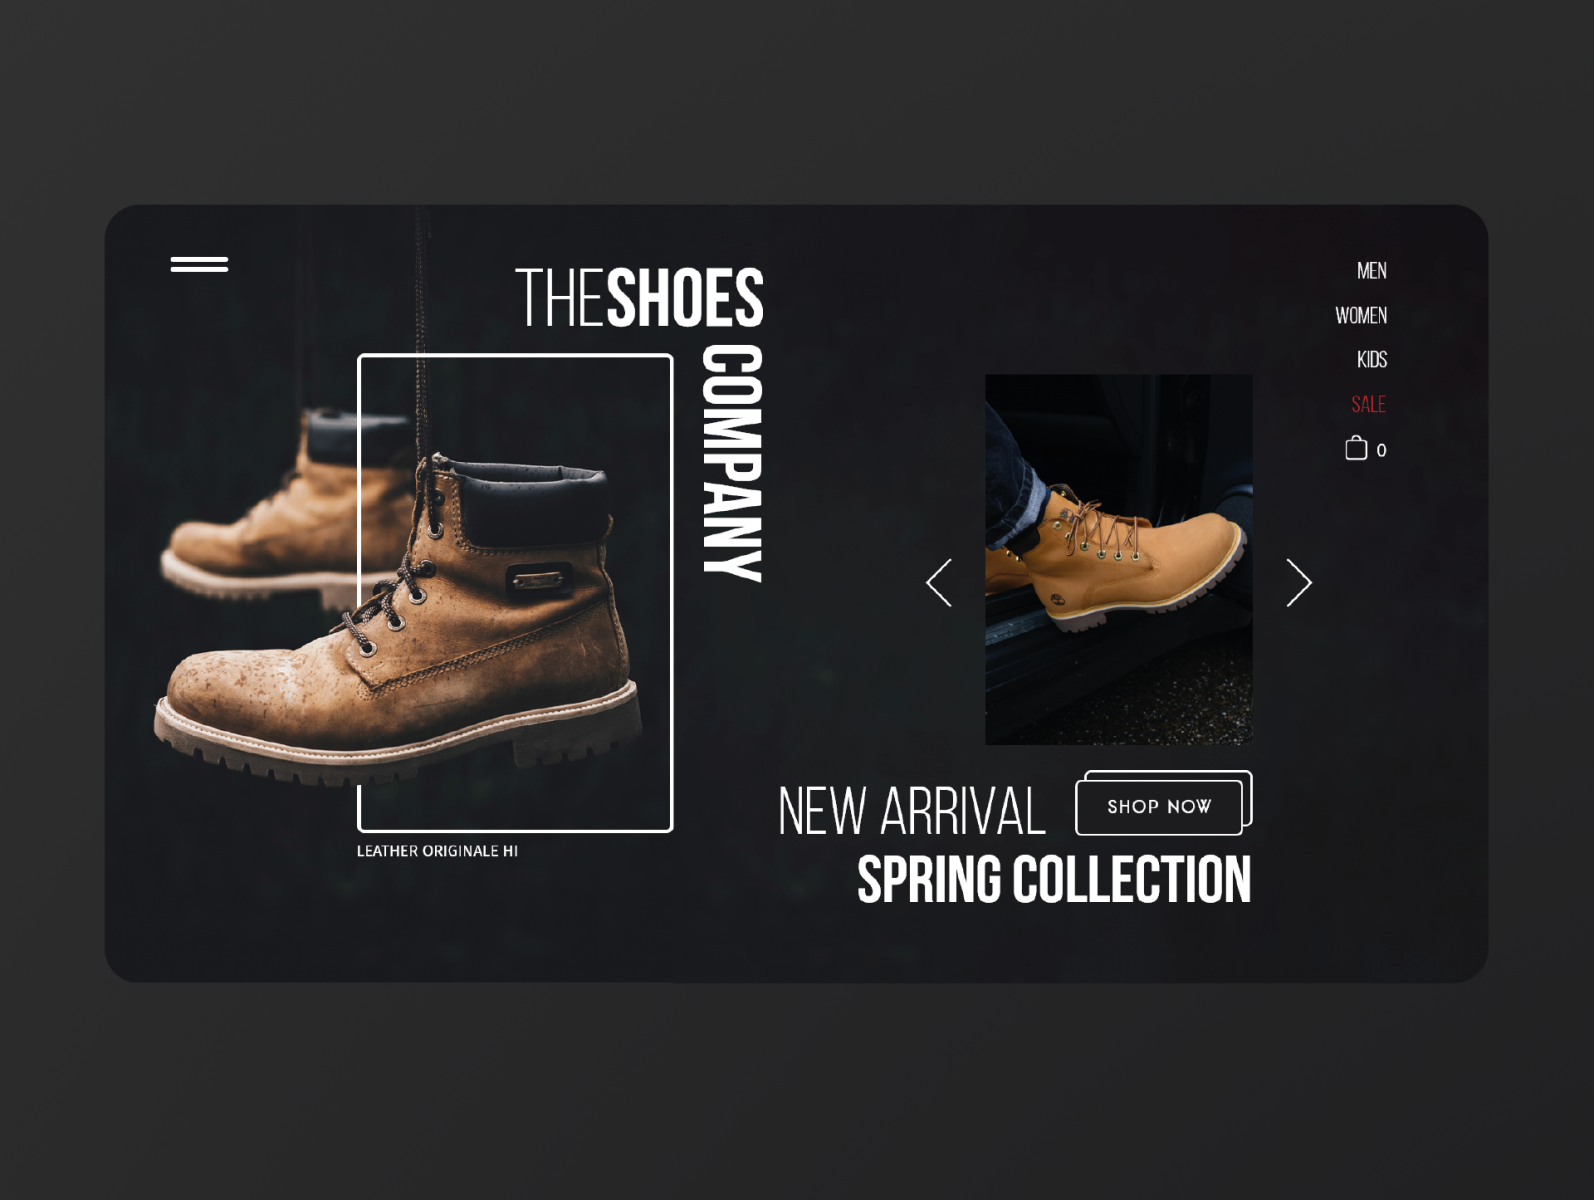 The Shoes Company by Cuong Huy Le Nguyen on Dribbble